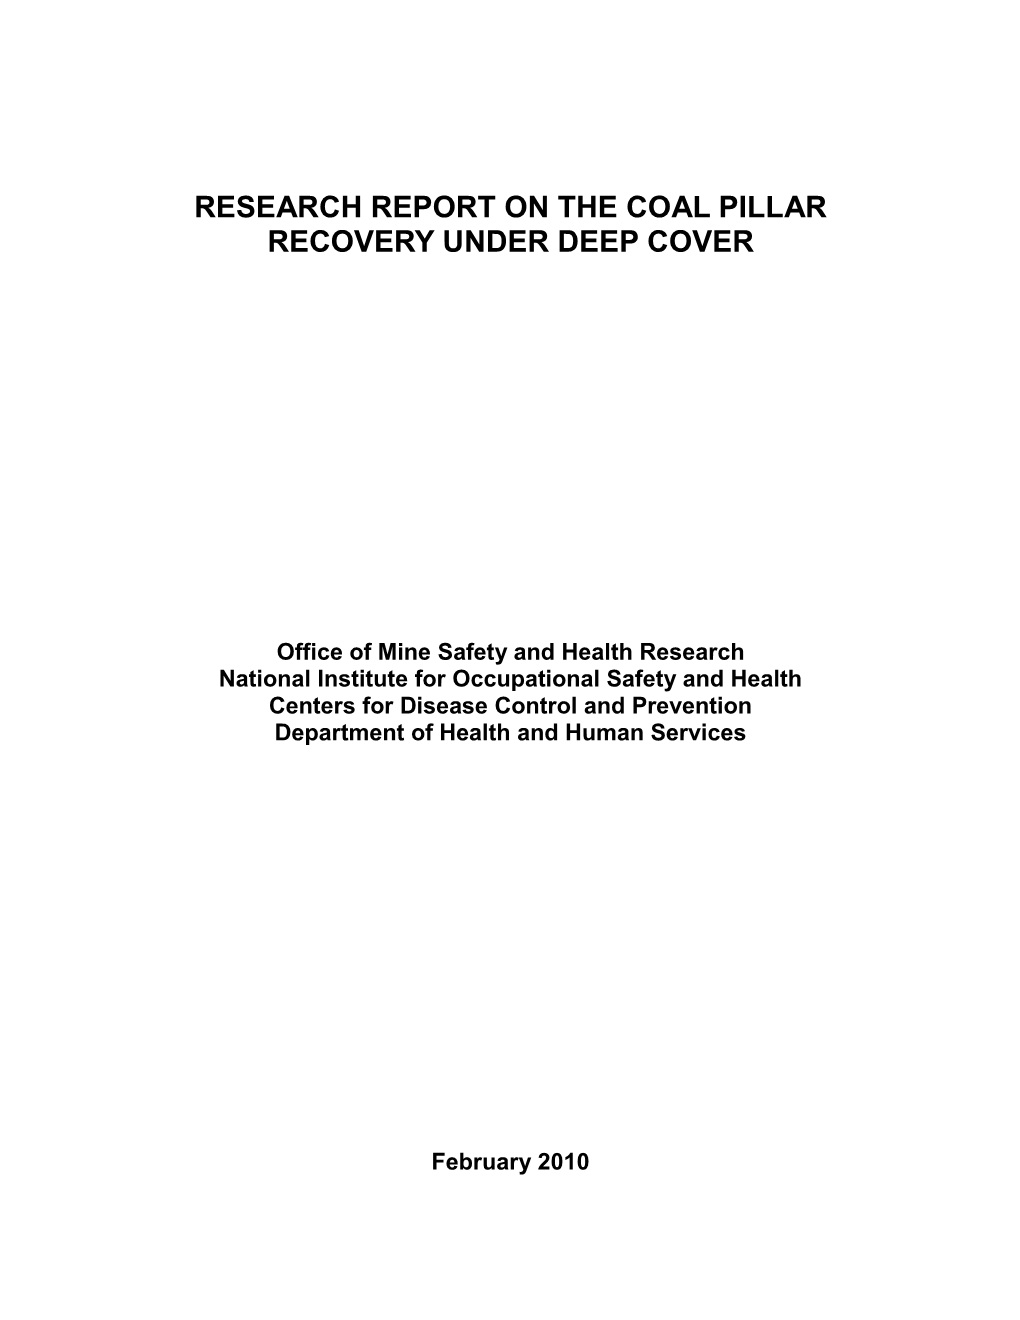 Research Report on the Coal Pillar Recovery Under Deep Cover